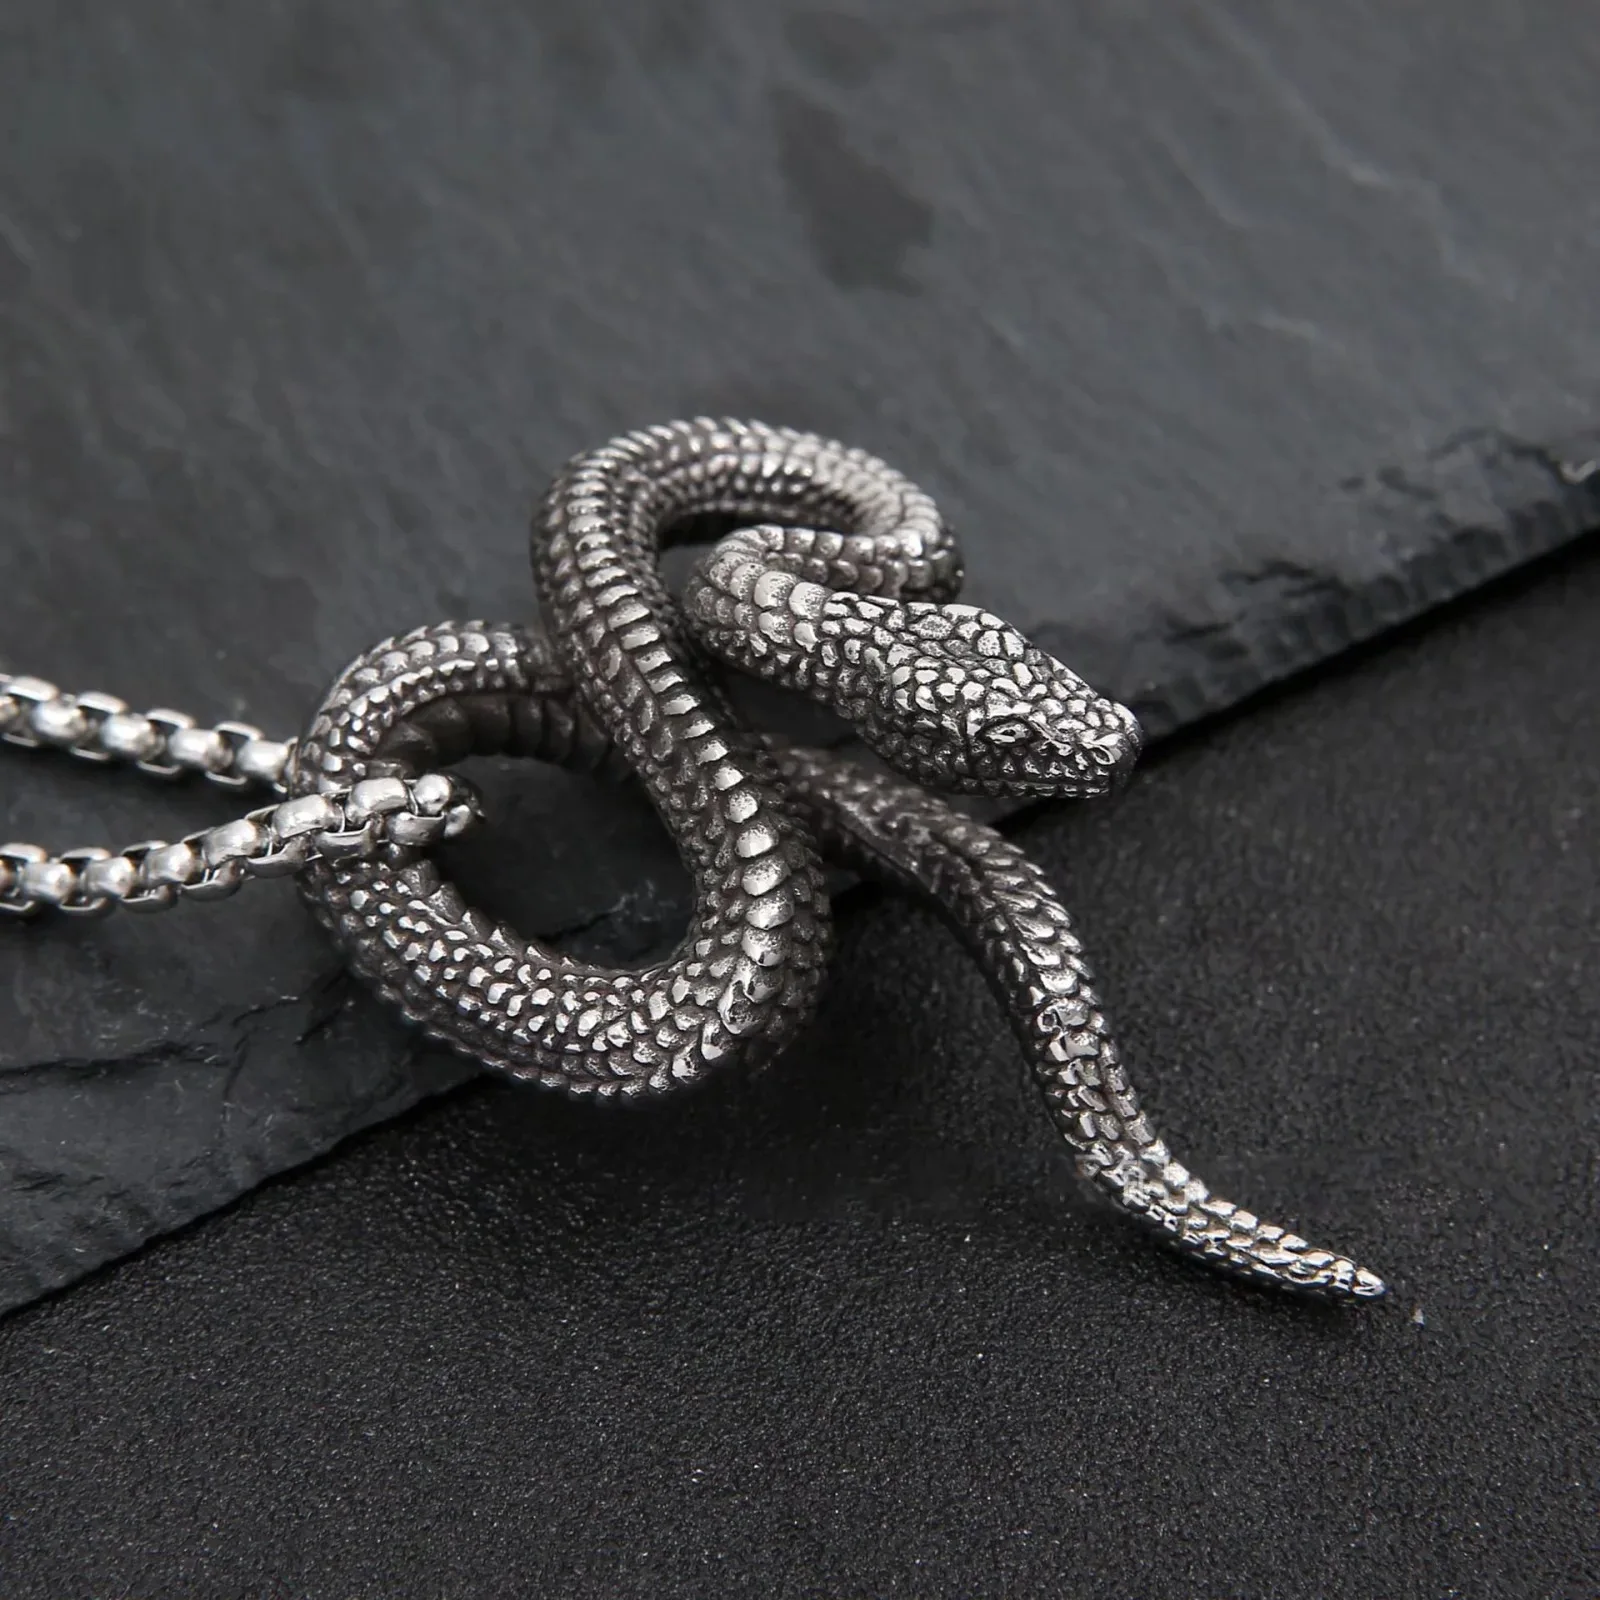 Kpop Men chains snake pendant stainless steel jewelry man necklace gift accessories  free shipping